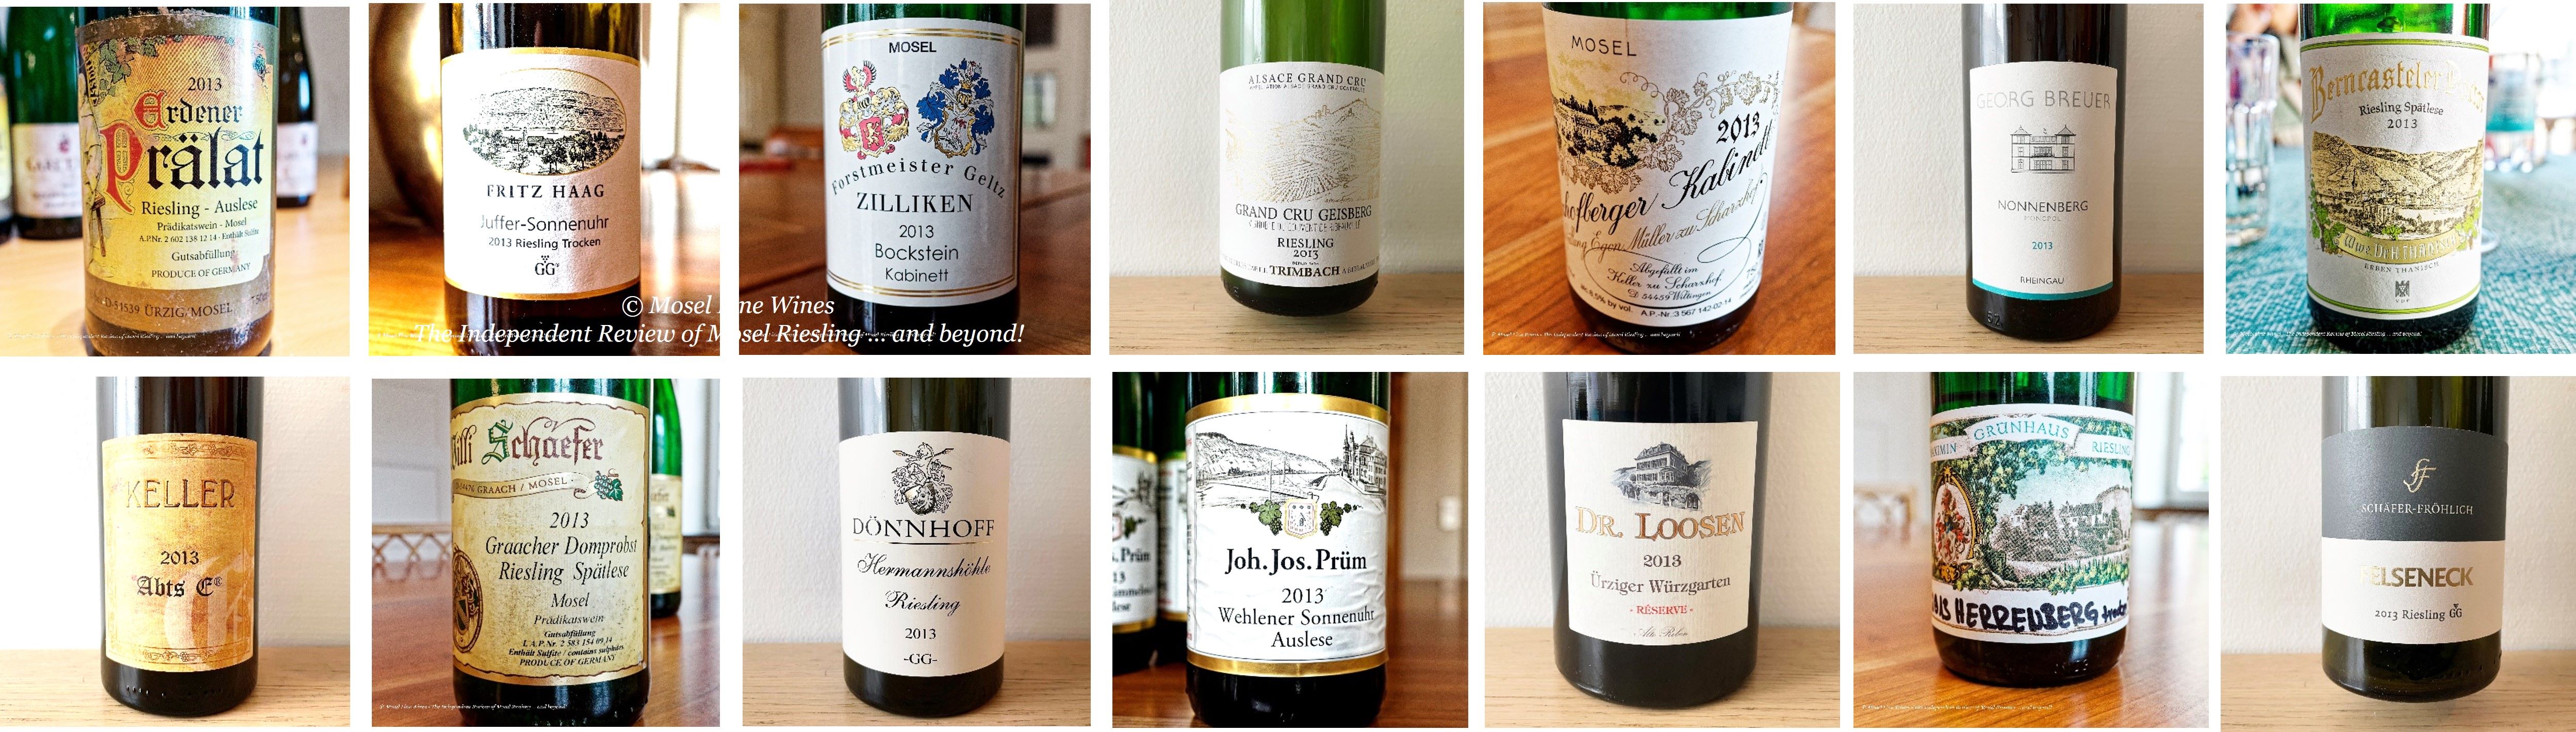 10 Years After Retrospective | 2013 Vintage | Riesling | Wine | Picture